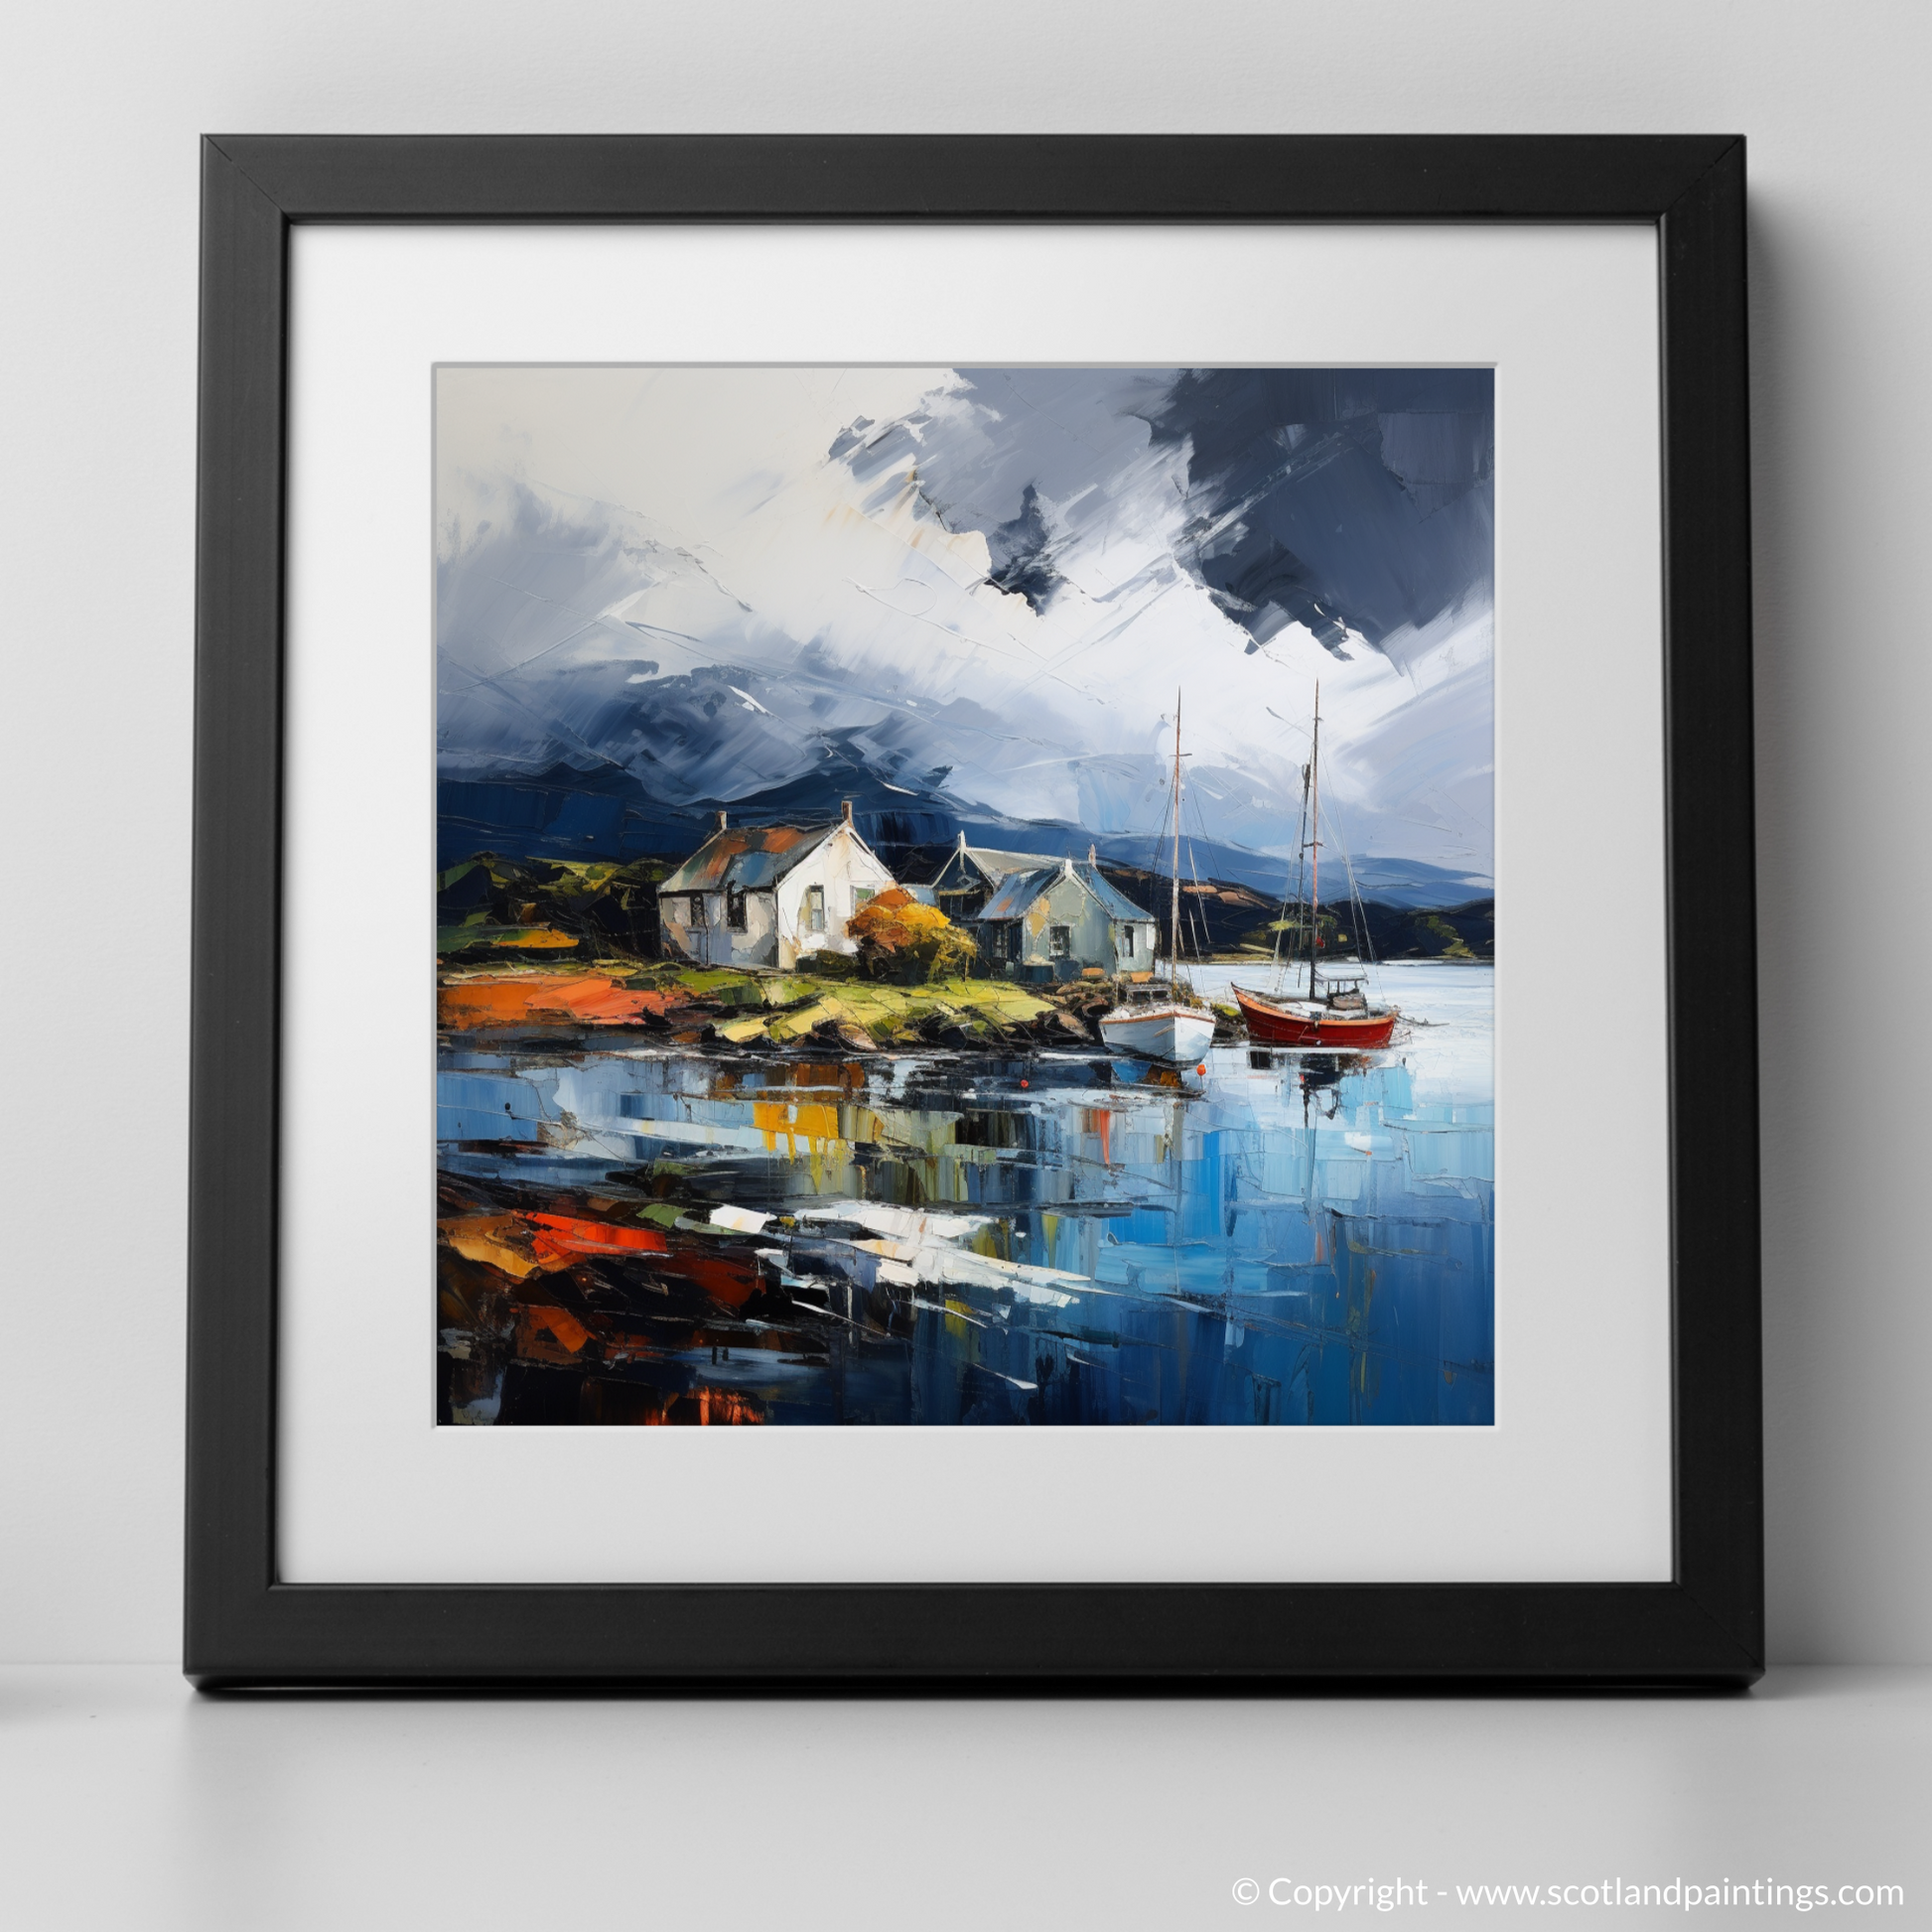 Art Print of Port Appin Harbour with a stormy sky with a black frame